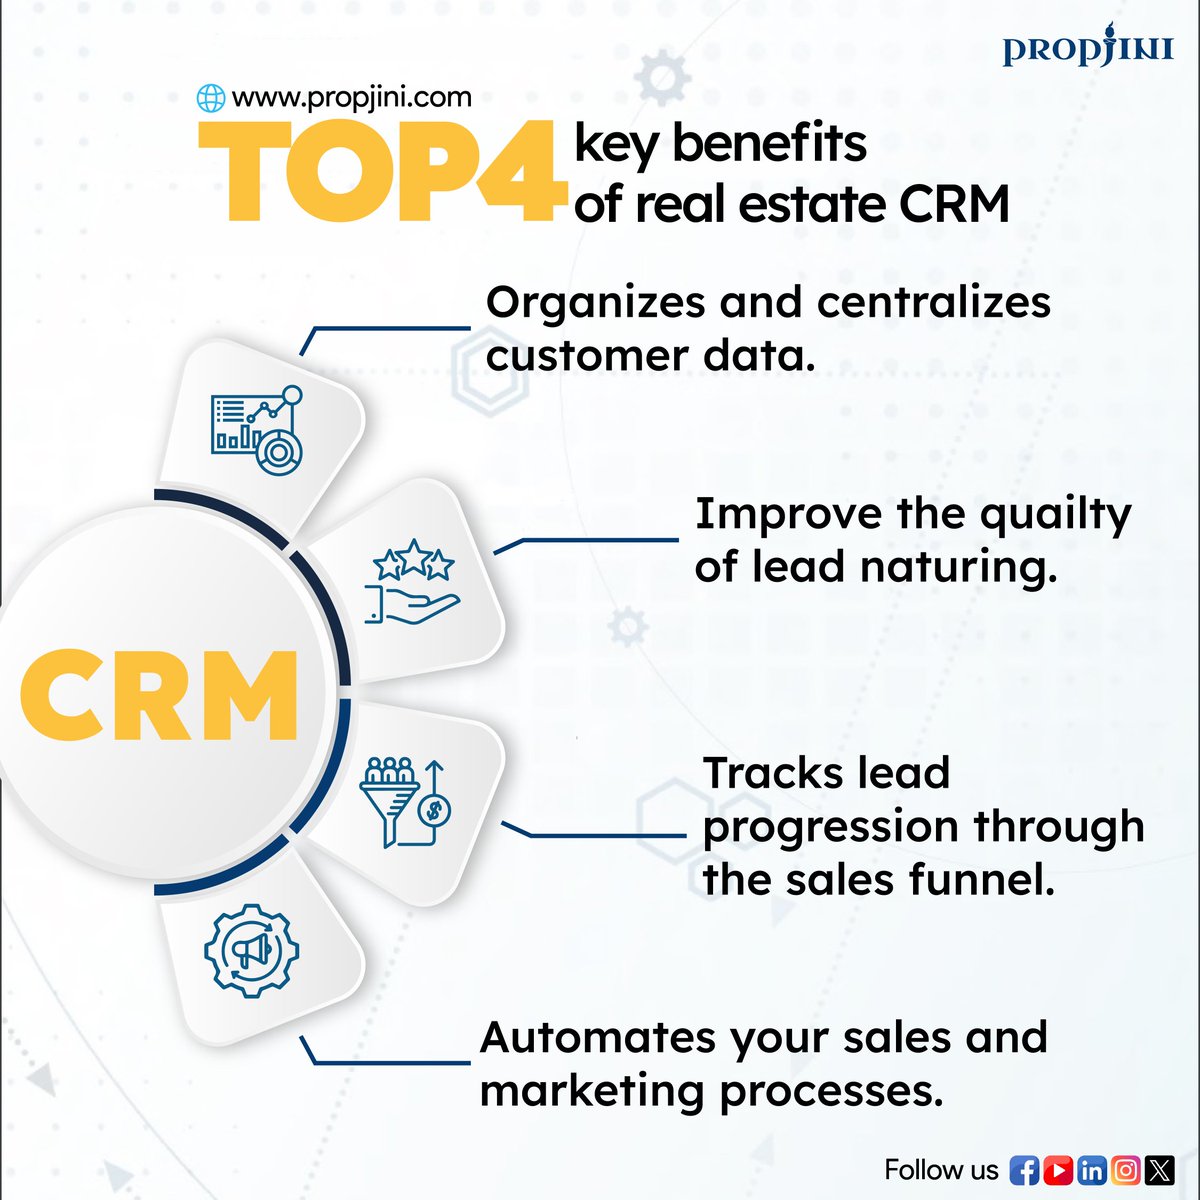 Boost Your Business with Propjini CRM!

✨ Streamlined Lead Management 🤩
✨ Effortless Way For Lead Nurturing 🪴 
✨ Insightful Lead Details for Better Conversions 🚀
✨ Intelligent Automation 🤖

#PropjiniCRM #CustomerRelationshipManagement #BusinessGrowth #Automation #CRM